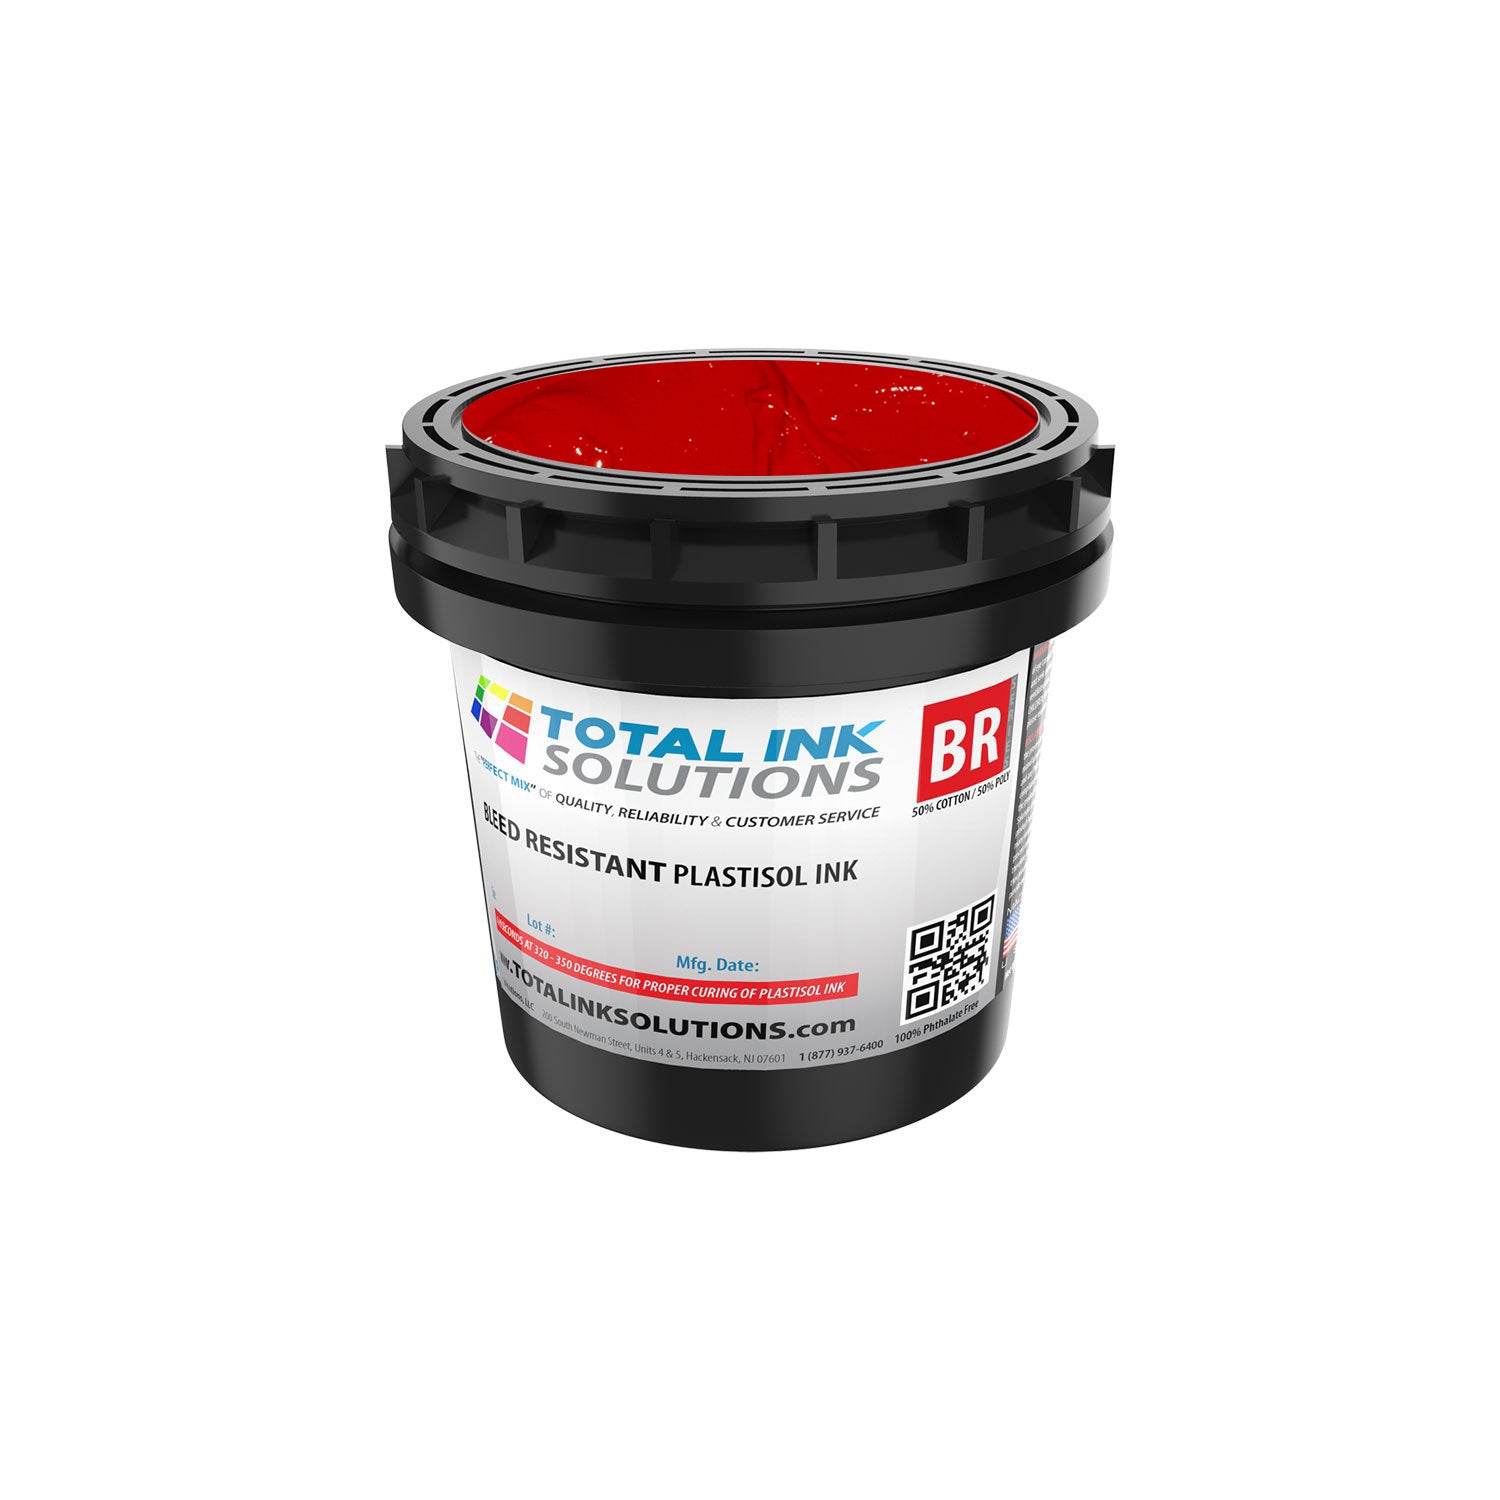 ALL PURPOSE PLASTISOL INK - WHITE - GALLON - Total Ink Solutions